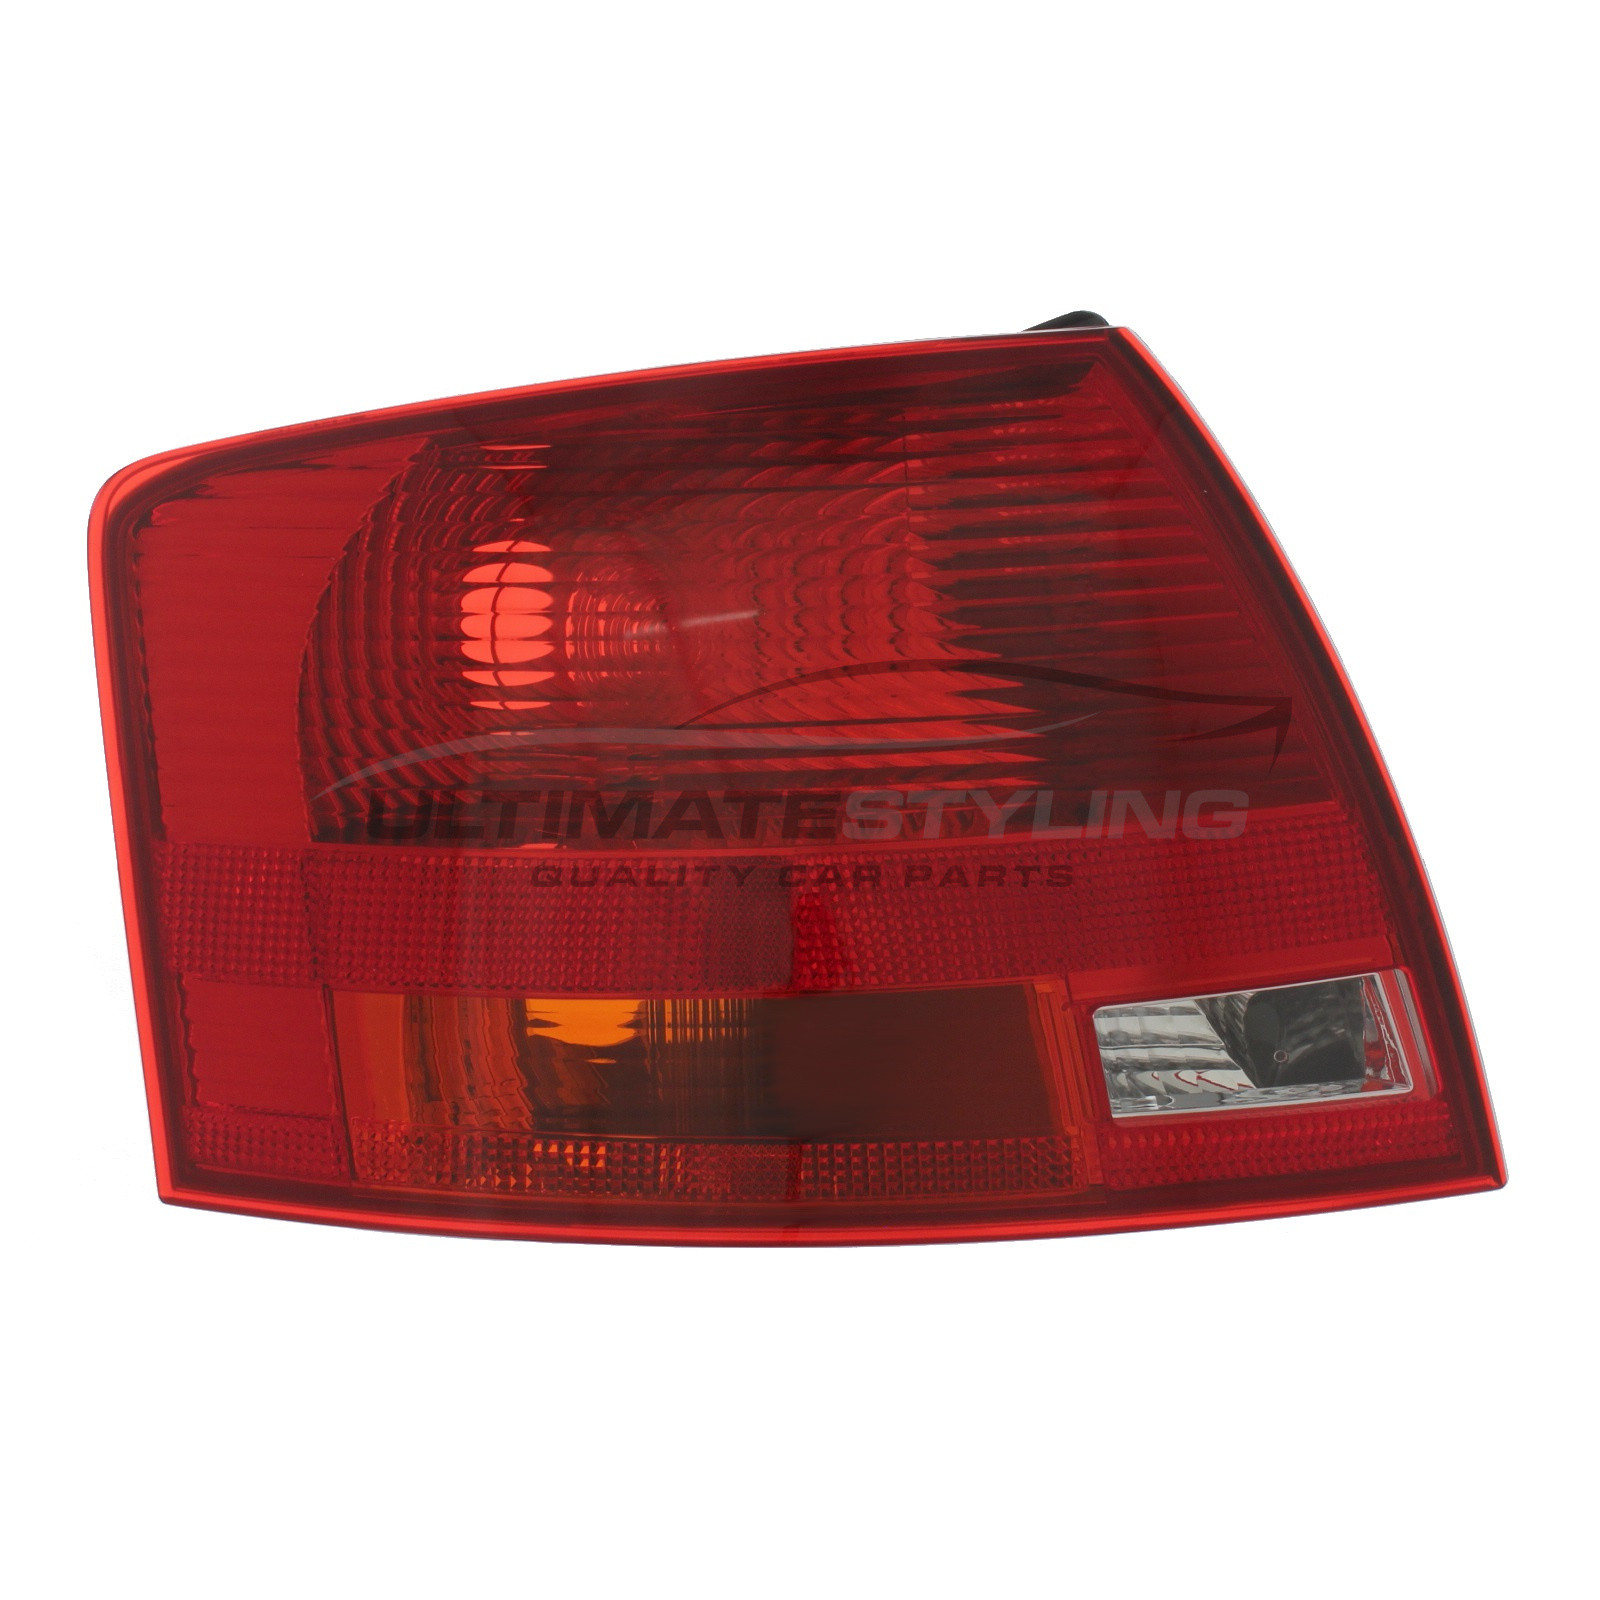 Audi A4 2004-2008 / Audi RS4 2006-2008 Non-LED Outer (Wing) Rear Light / Tail Light Excluding Bulb Holder Passenger Side (LH)